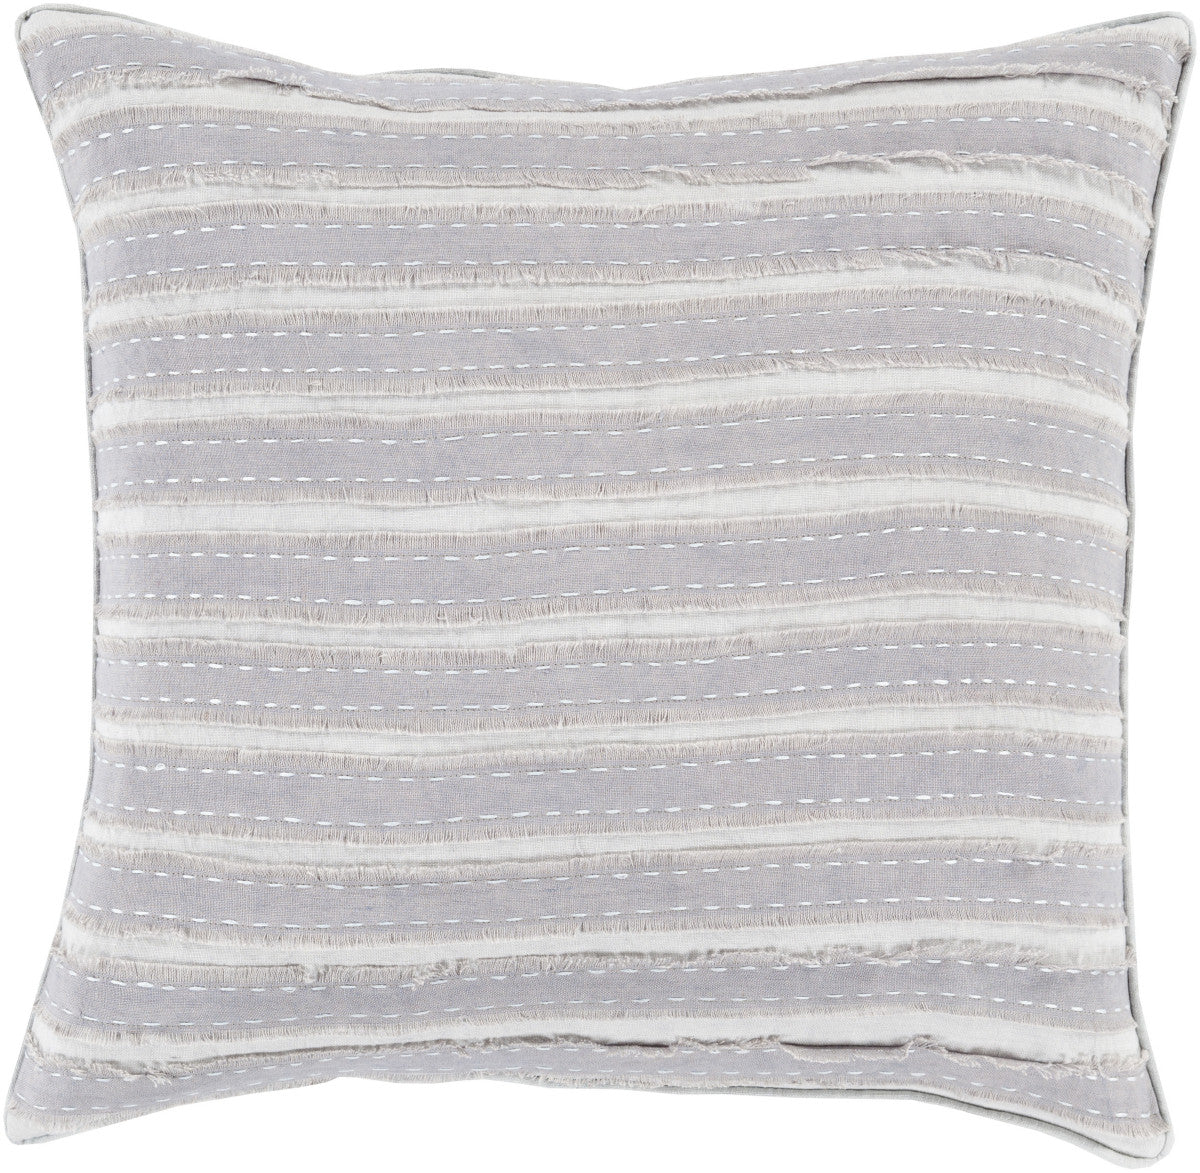 Surya Willow Charm and Comfort WO-004 Pillow